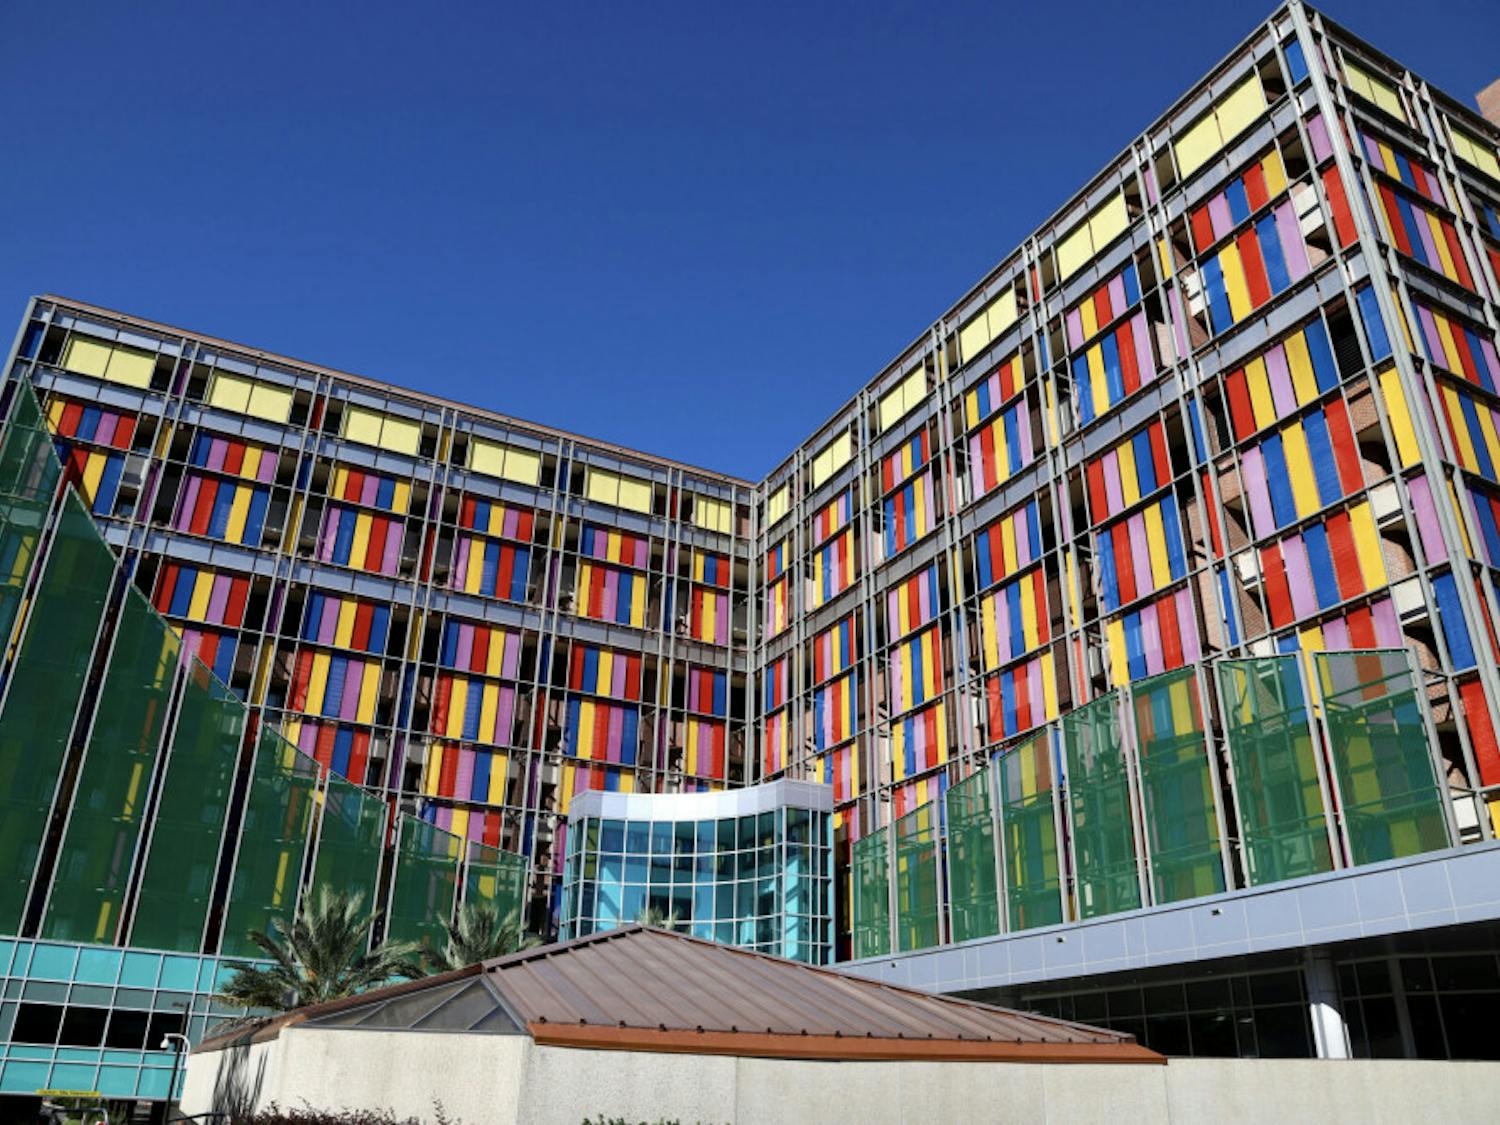 The multi-colored glass of the UF Health Shands Children’s Hospital shines as the sun reflects off the panes on September 25, 2020. The pediatric staff provide care in more than 20 specialties including pediatric hematology-oncology.